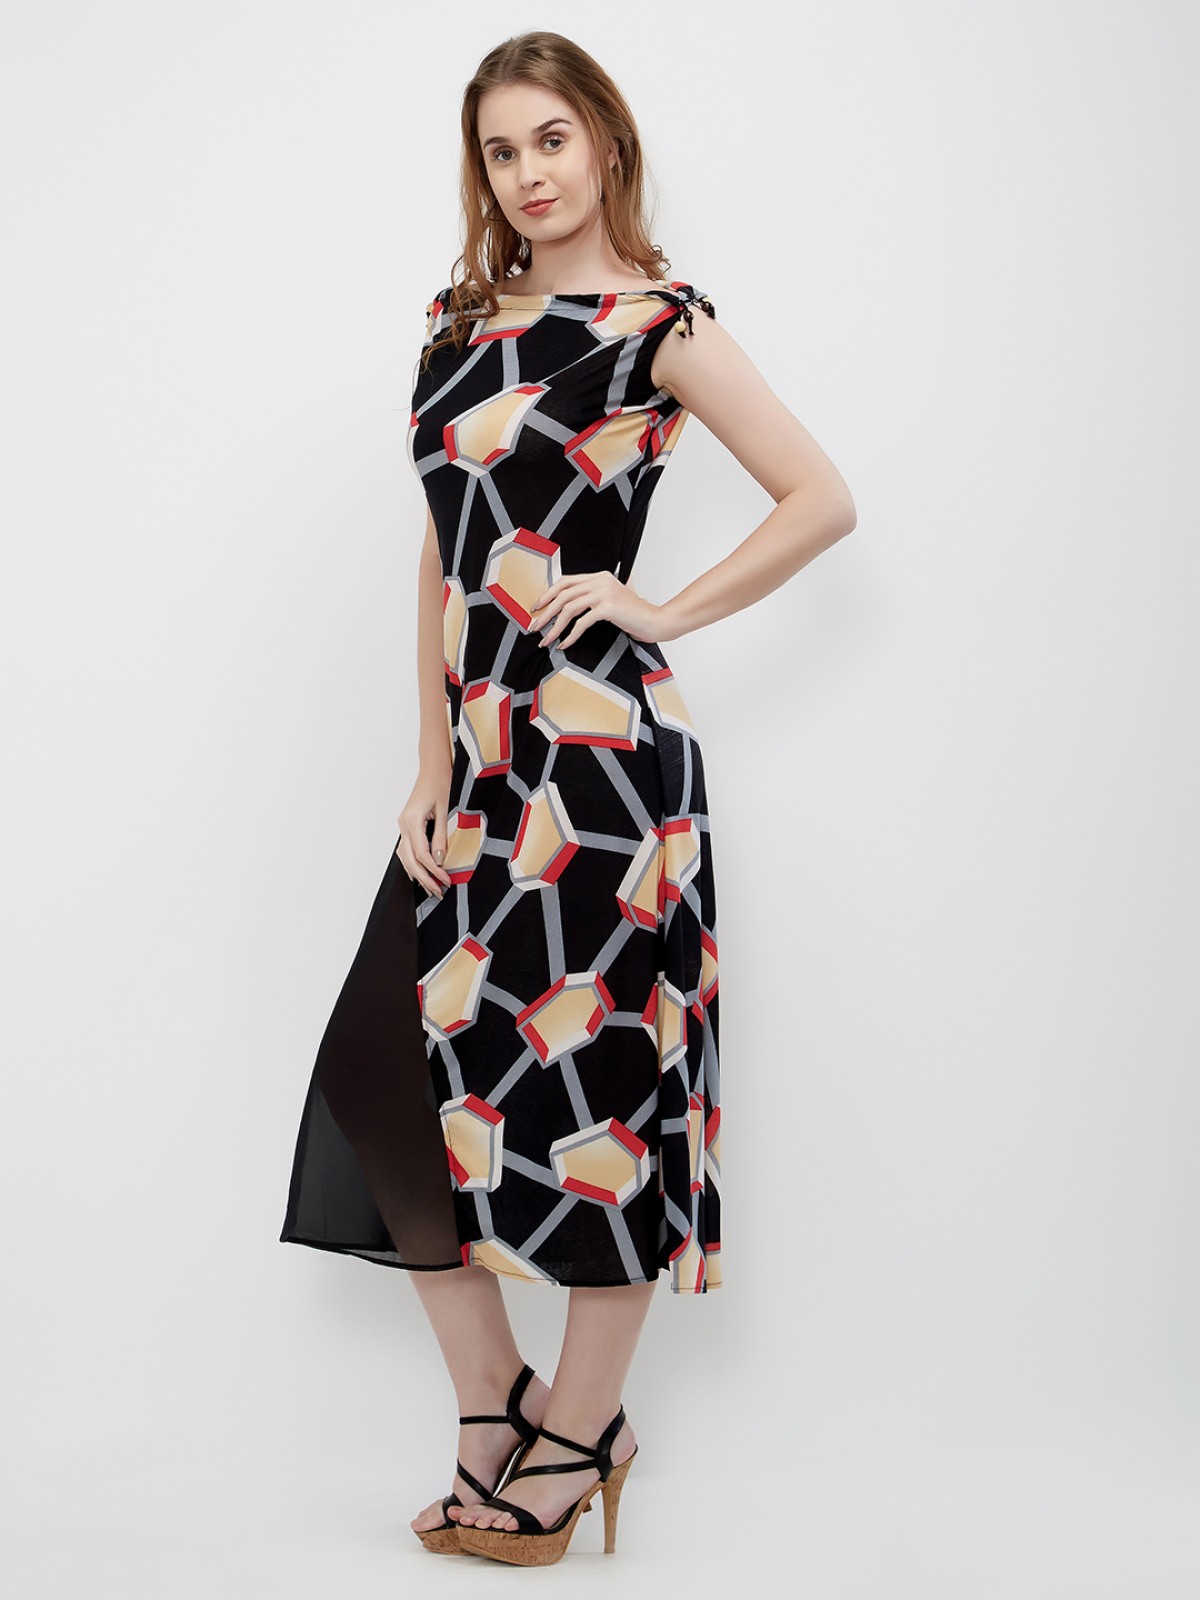 Black Abstract Printed Onepiece Long Sleeveless Poly-Lycra Dress